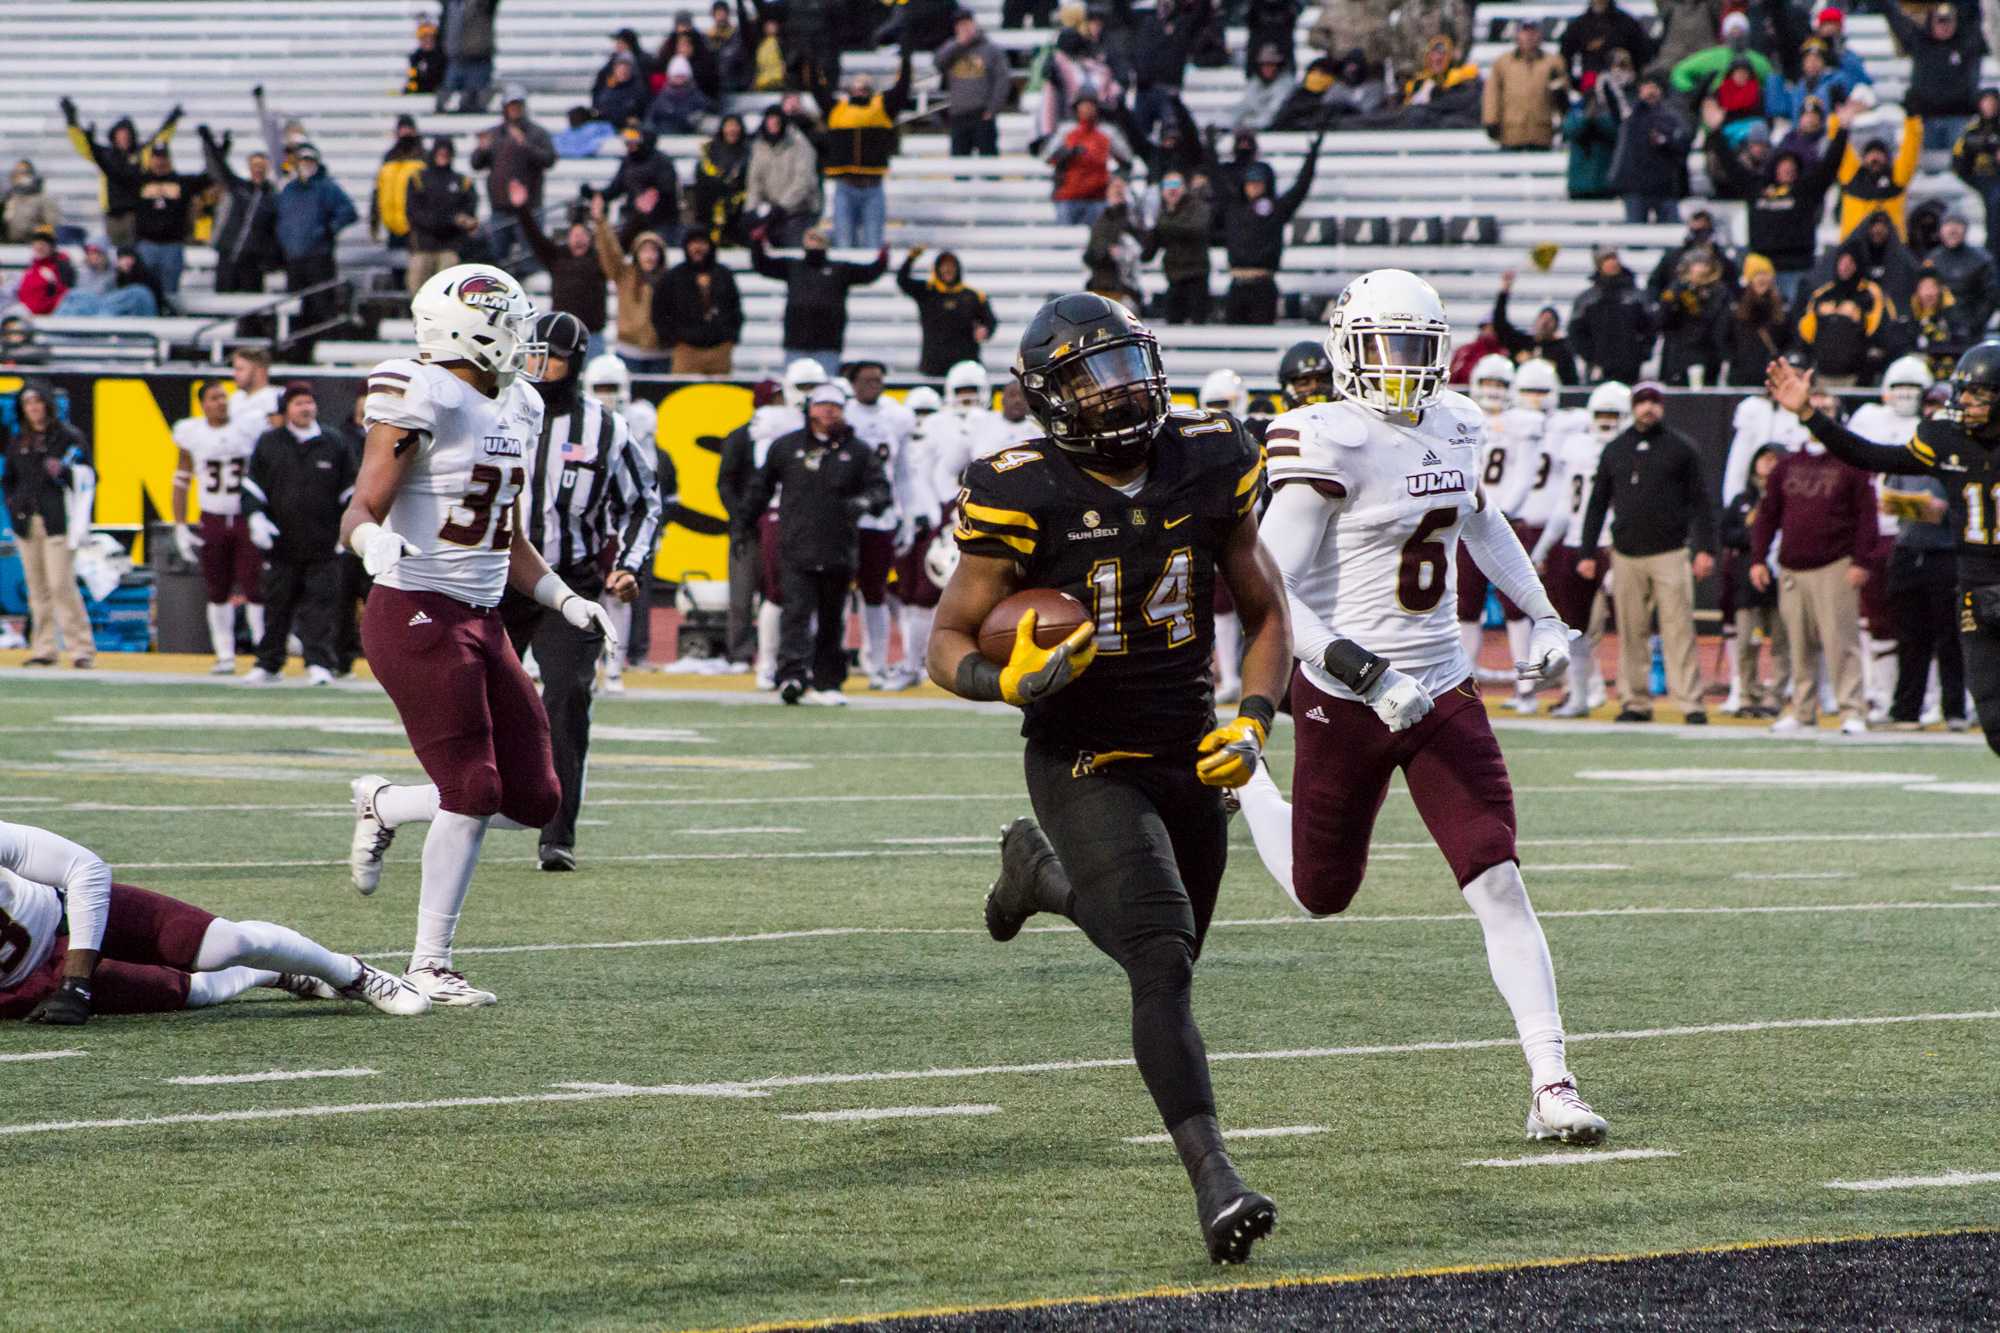 Senior Running Back, Marcus Cox, scores a touchdown during the game against Monroe. He is now Appalachian State's all time leading rusher.